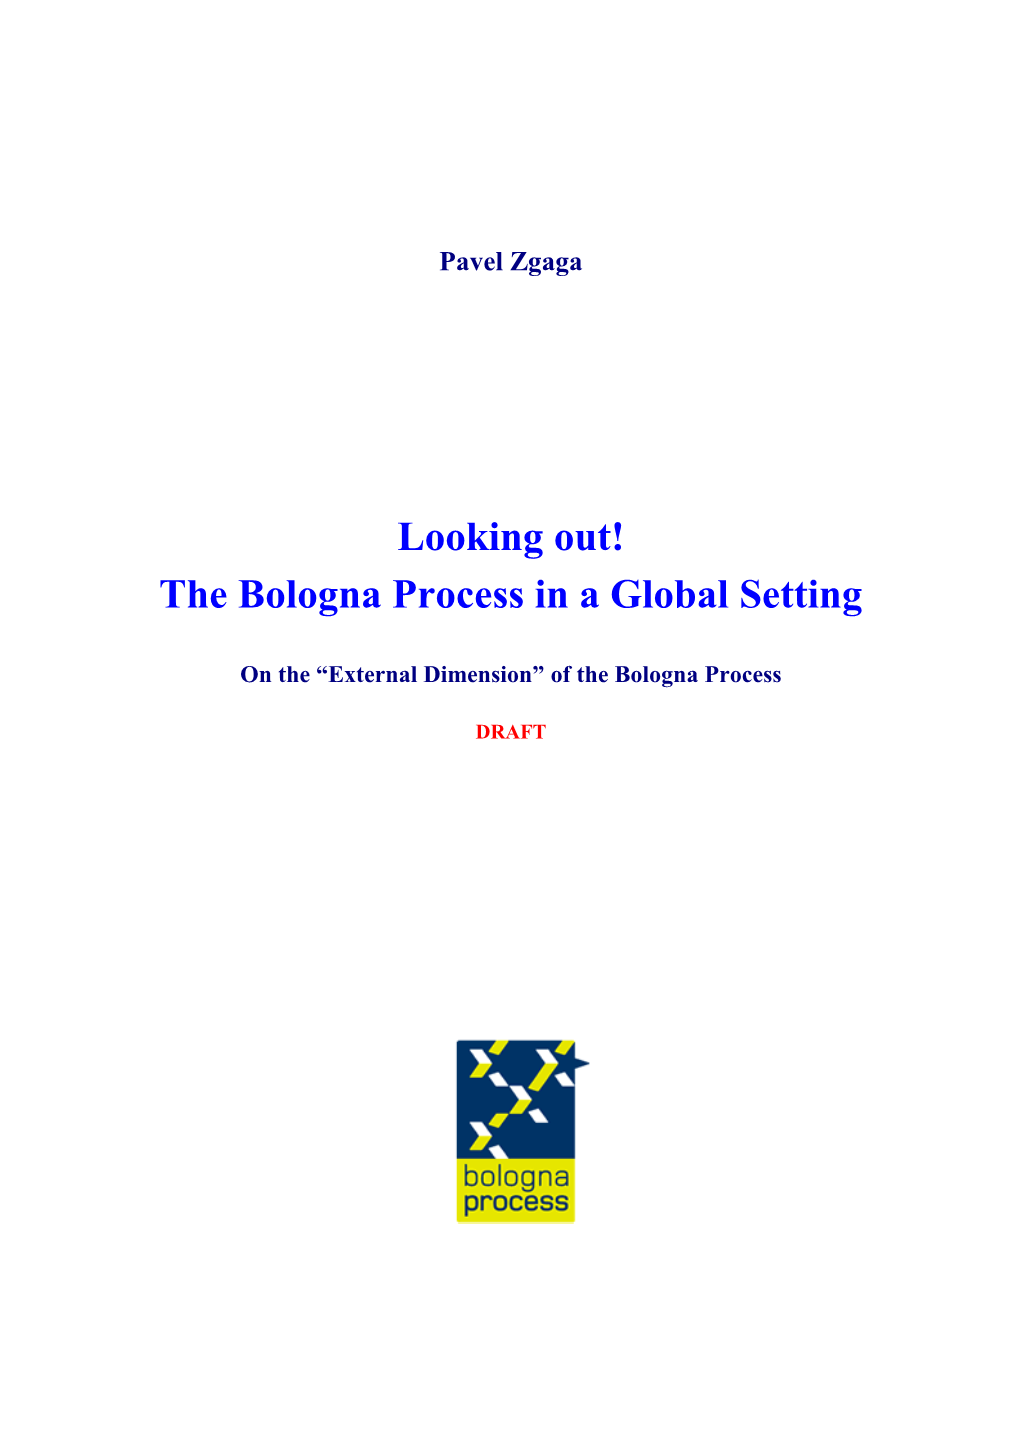 The Bologna Process in a Global Setting